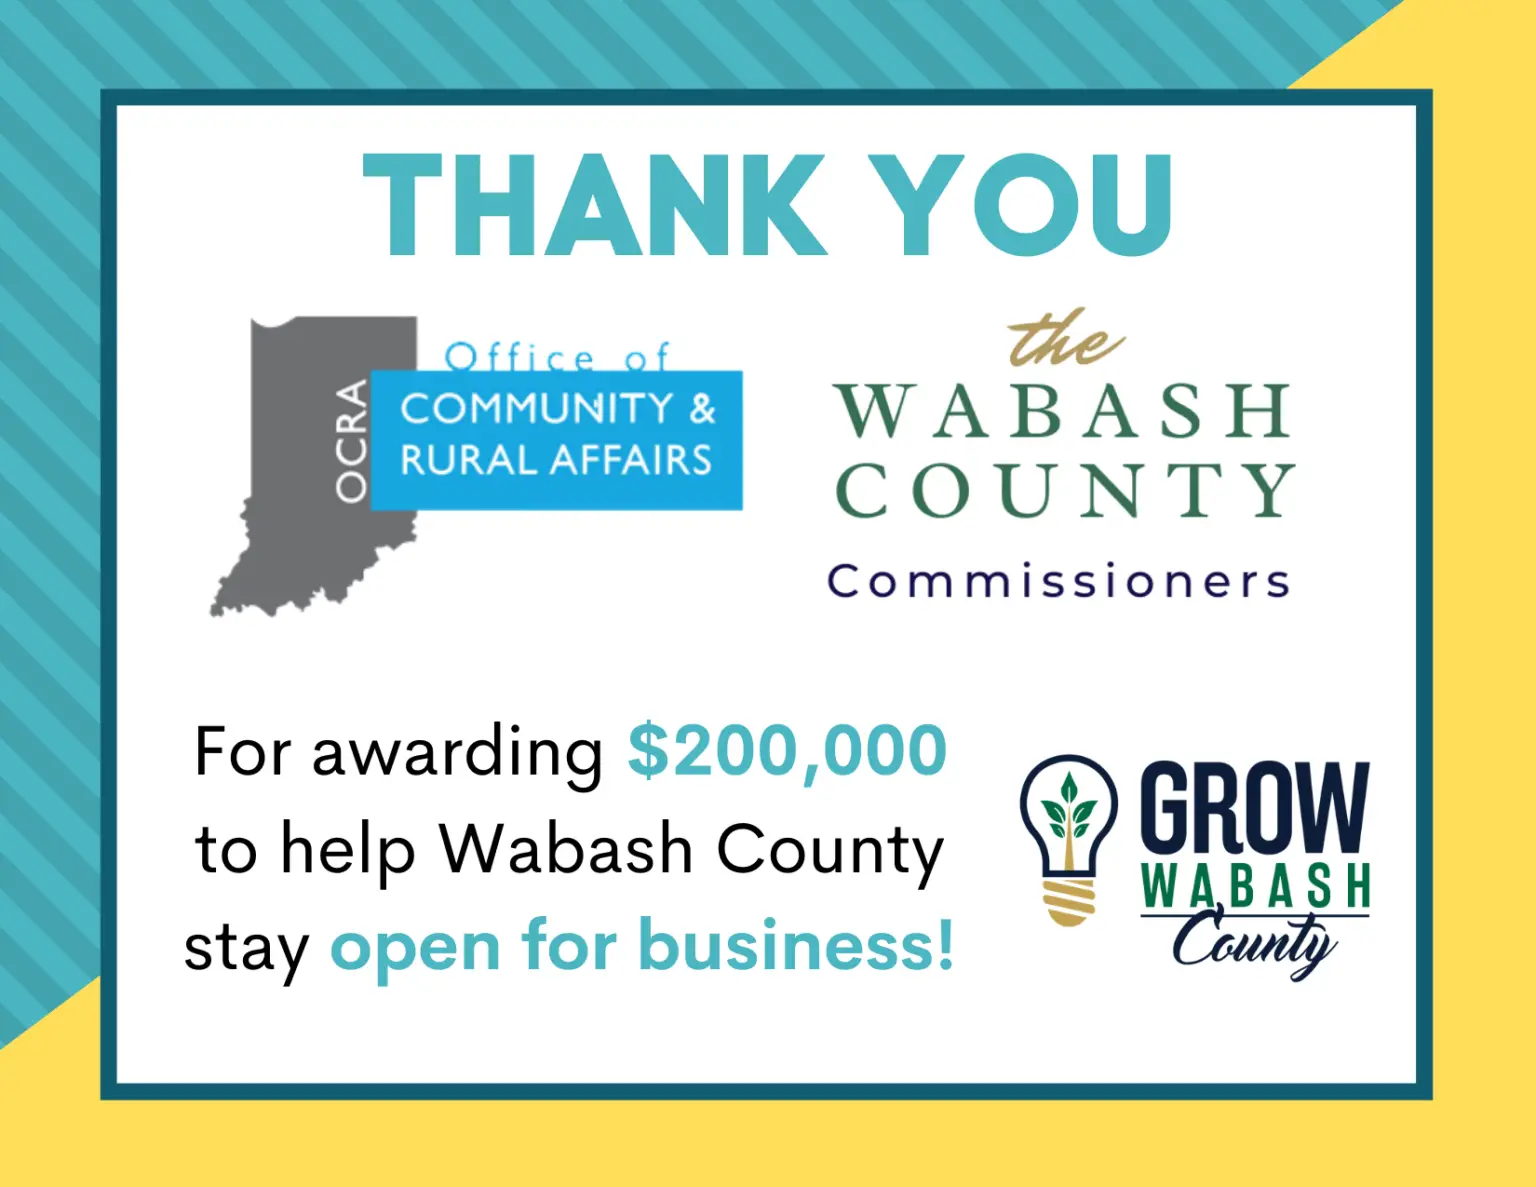 42 Wabash County businesses to receive COVID